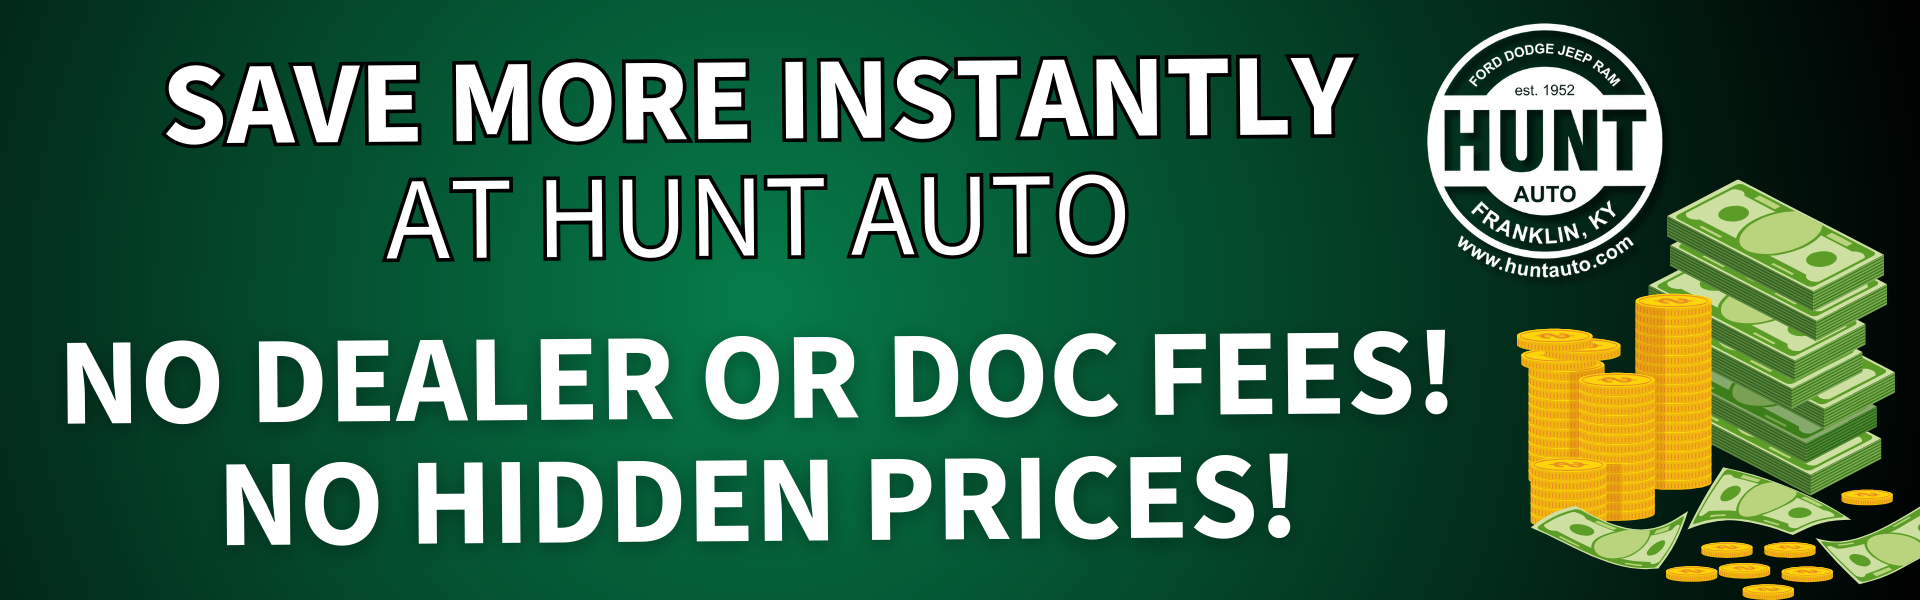 SAVE MORE INSTANTLY with No Dealer or Doc Fees